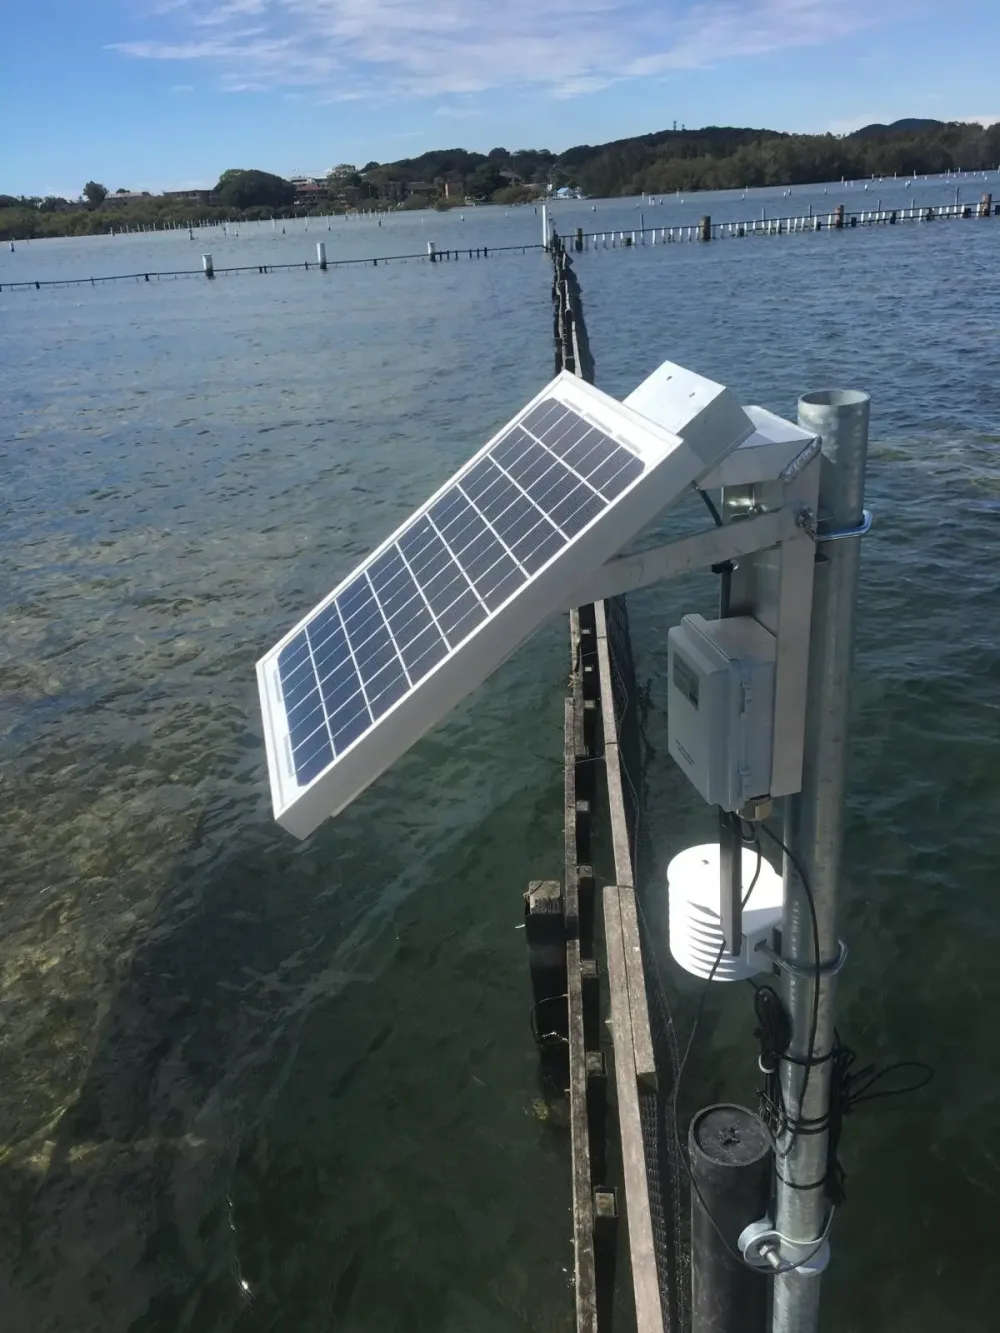 IoT CATM1 for aquaculture monitoring (microclimate weather station)